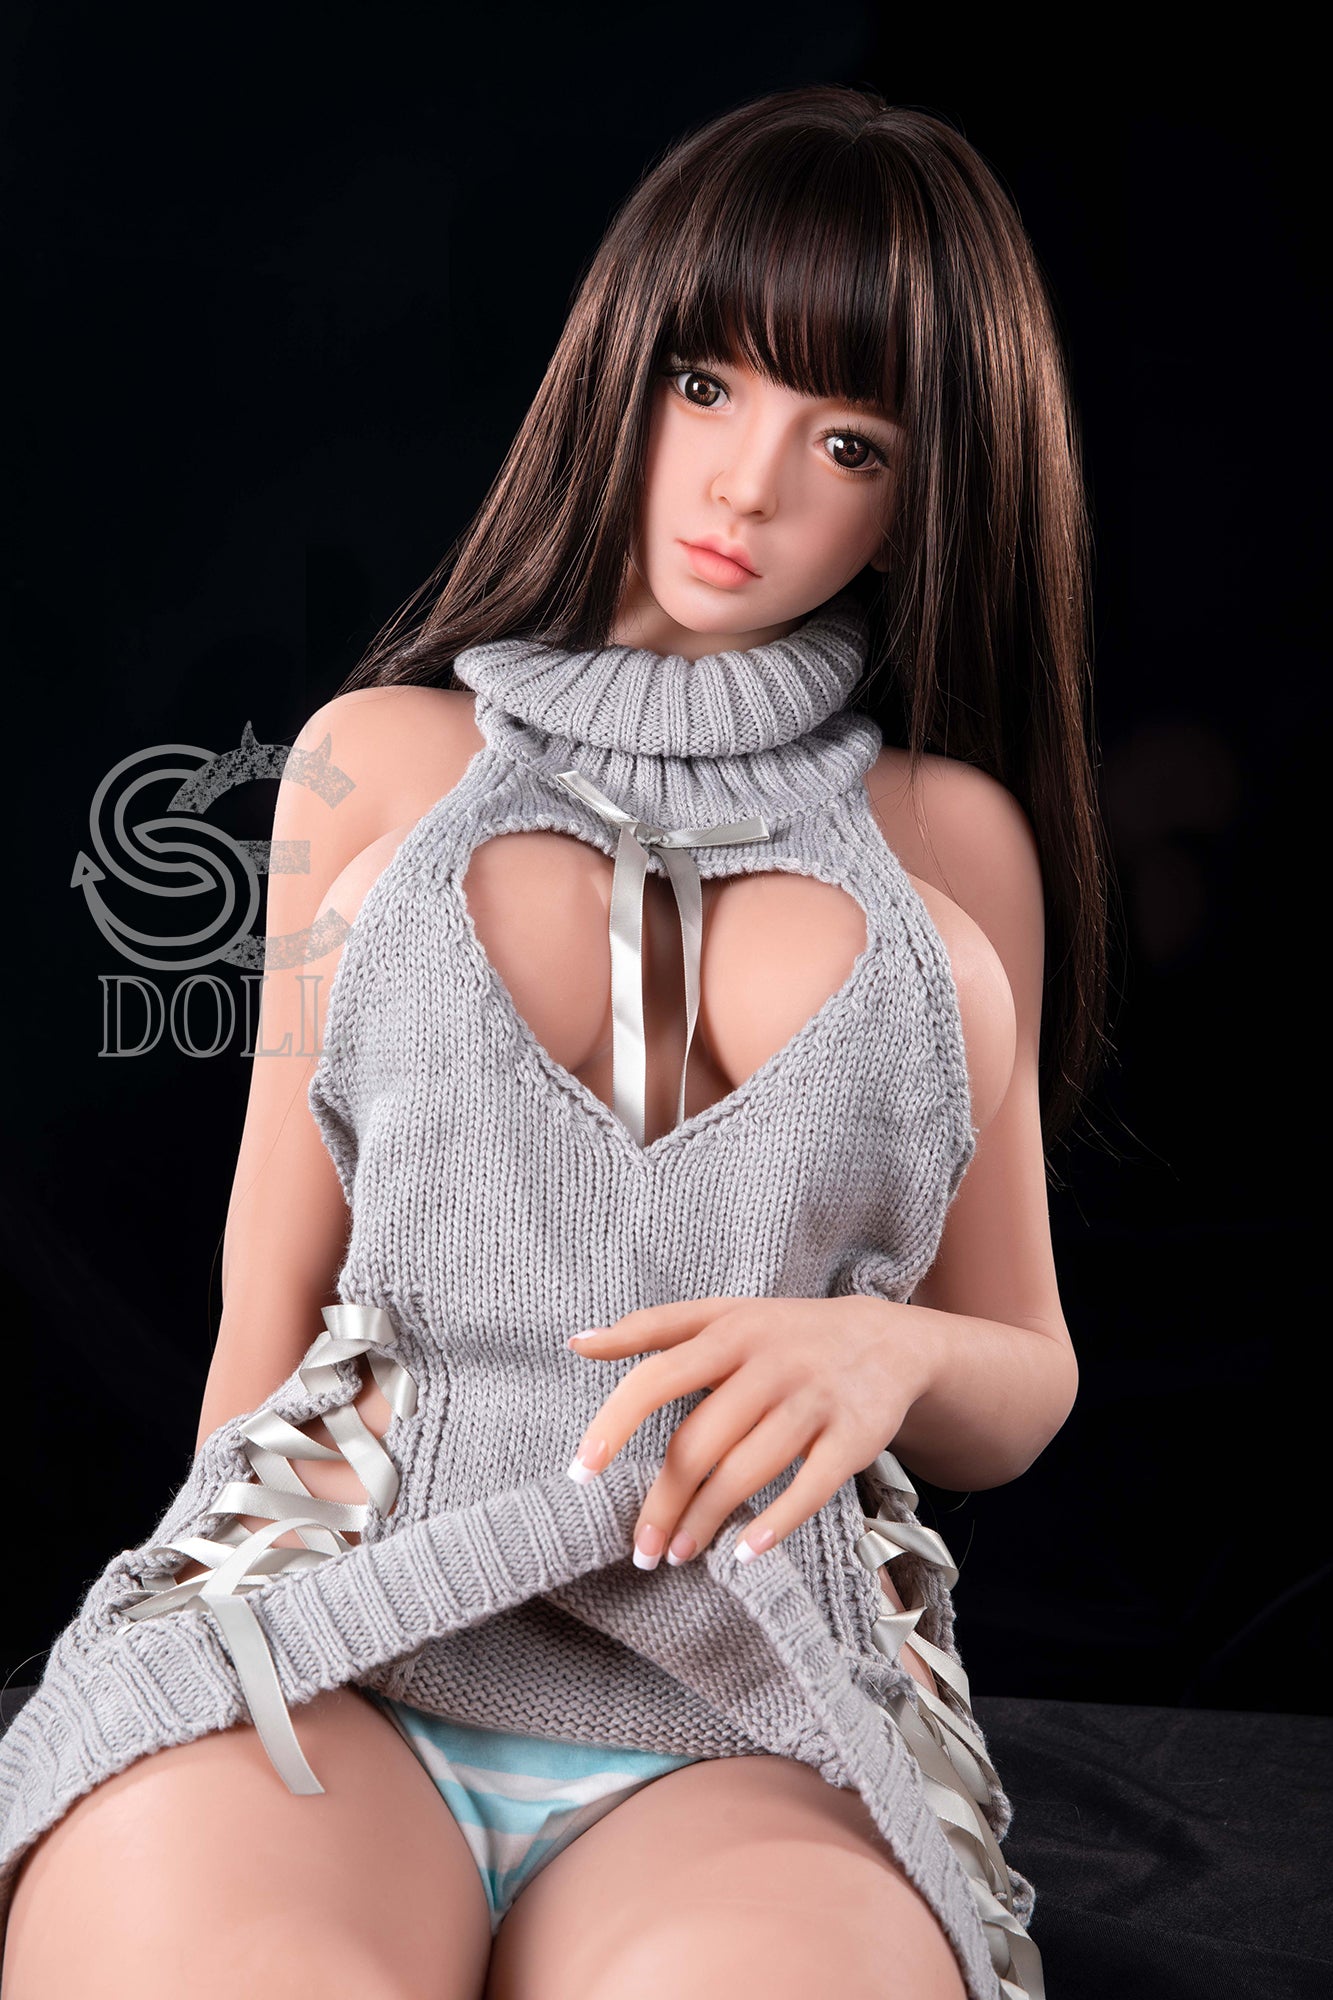 SEDOLL 161 cm F TPE - Isabella | Buy Sex Dolls at DOLLS ACTUALLY